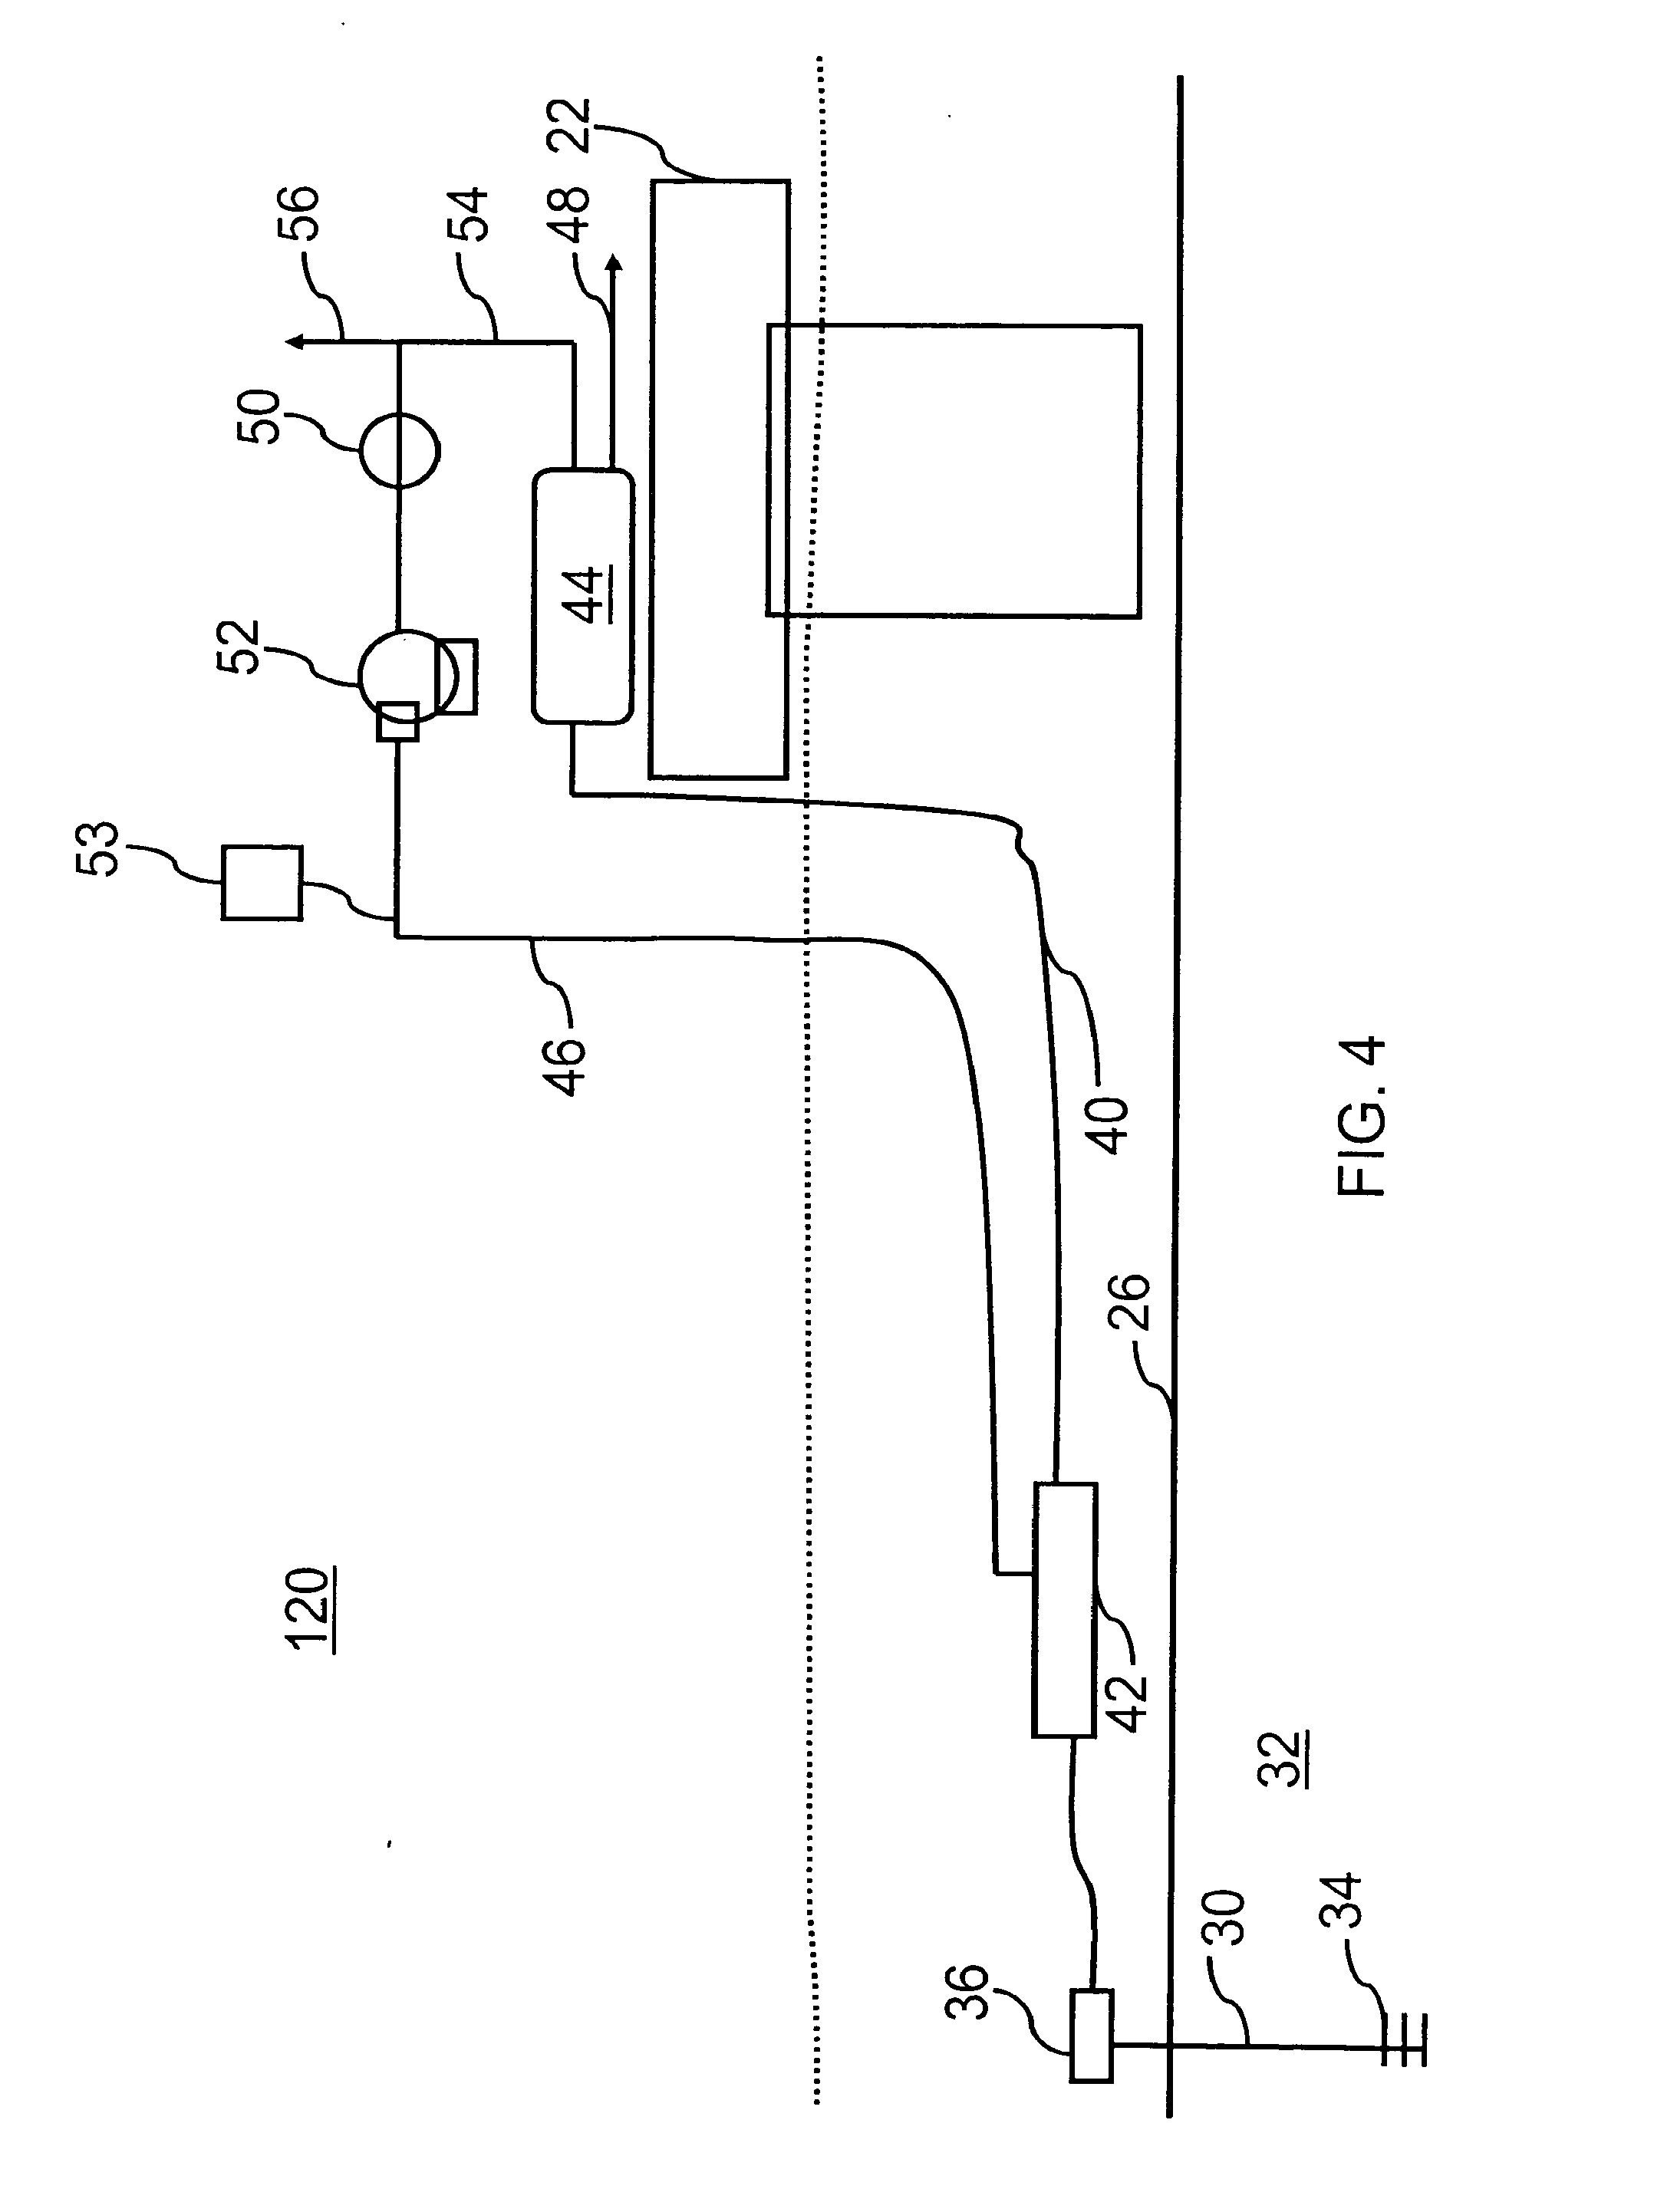 Method and System for Preventing Clathrate Hydrate Blockage Formation in Flow Lines by Enhancing Water Cut